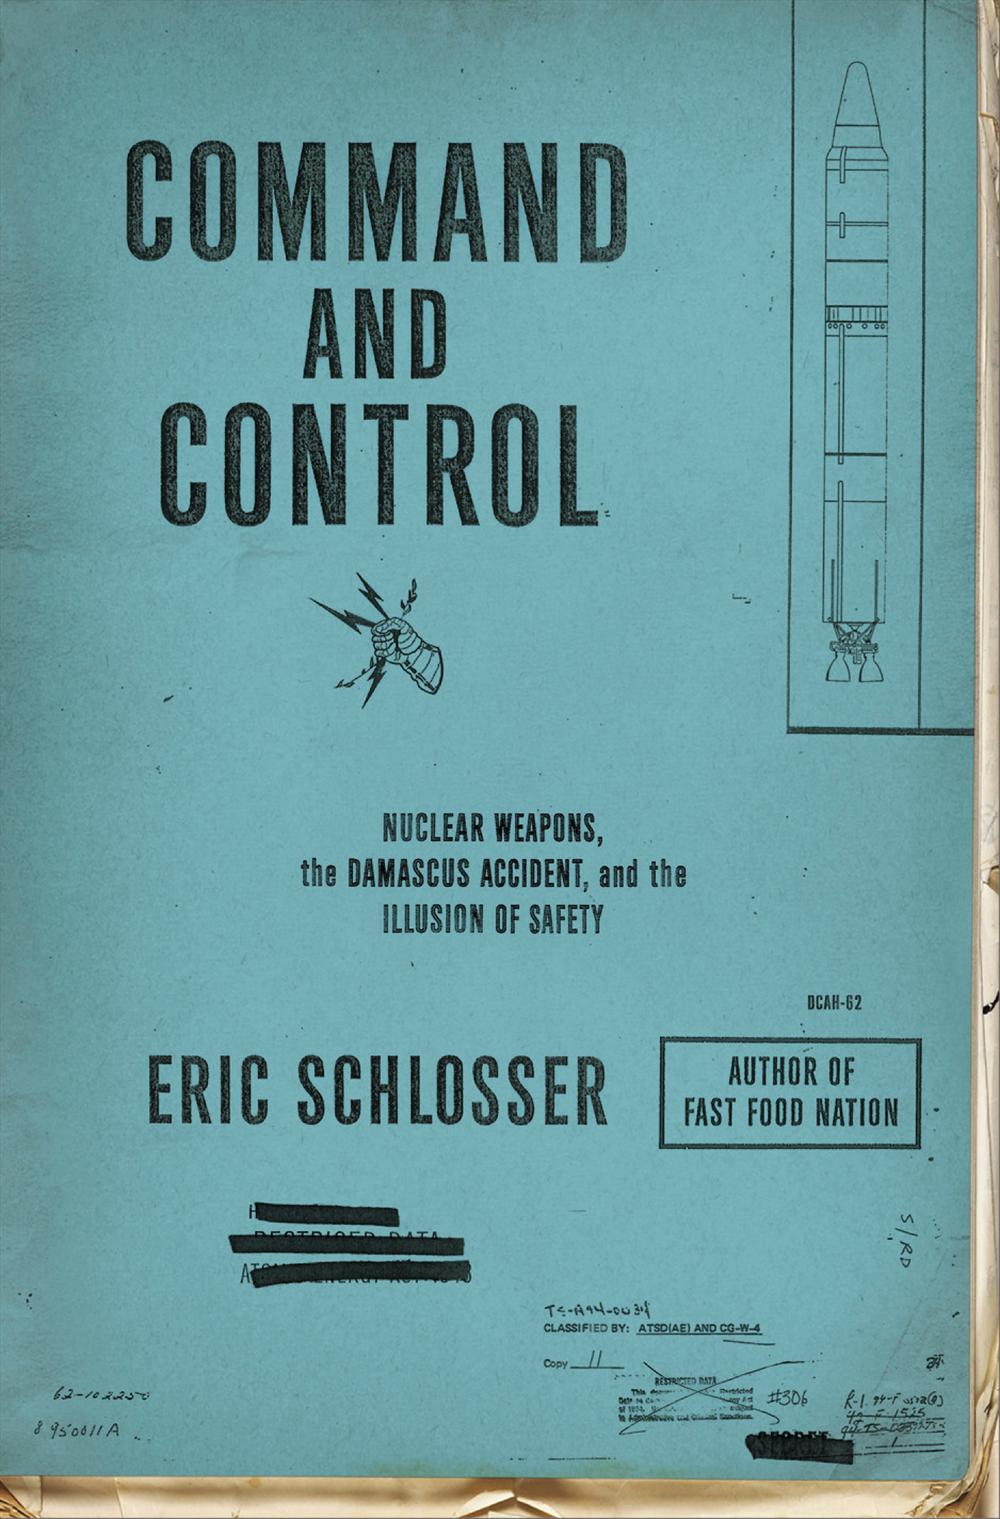 Eric Schlosser: Command and Control: Nuclear Weapons, the Damascus Accident, and the Illusion of Safety